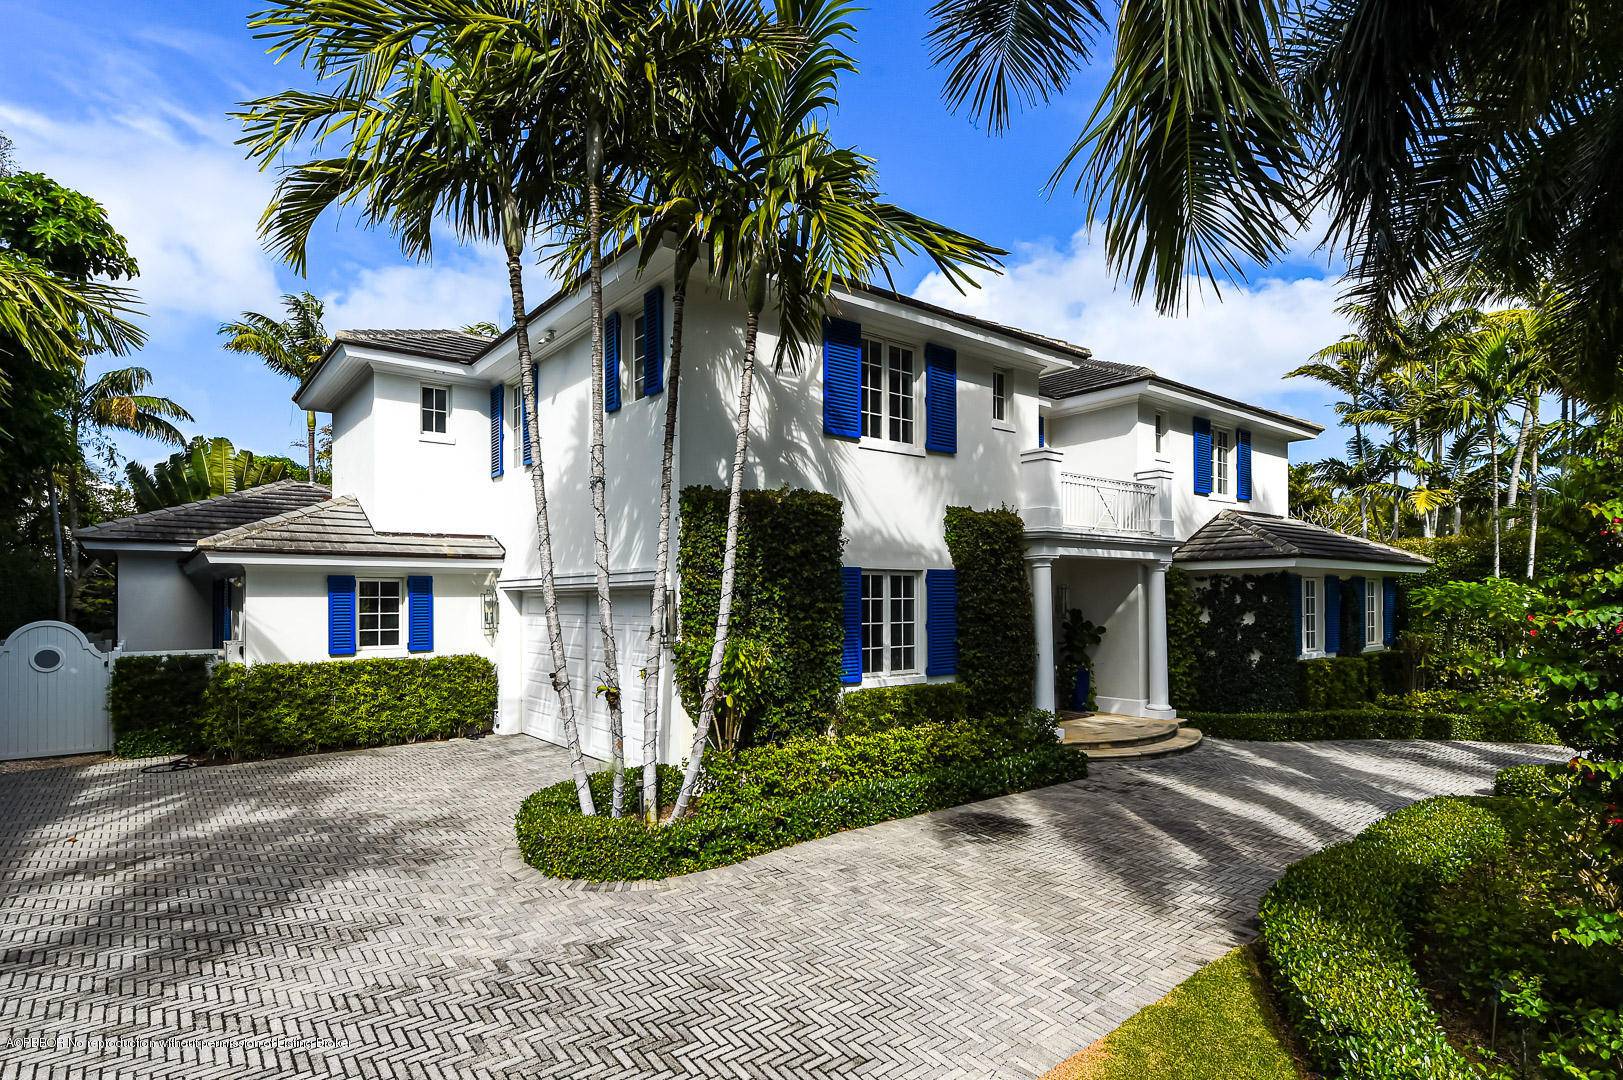 Gorgeous, light and bright British Colonial built in 2008 with 6 bedrooms, 7 bathrooms, and 1 powder room.